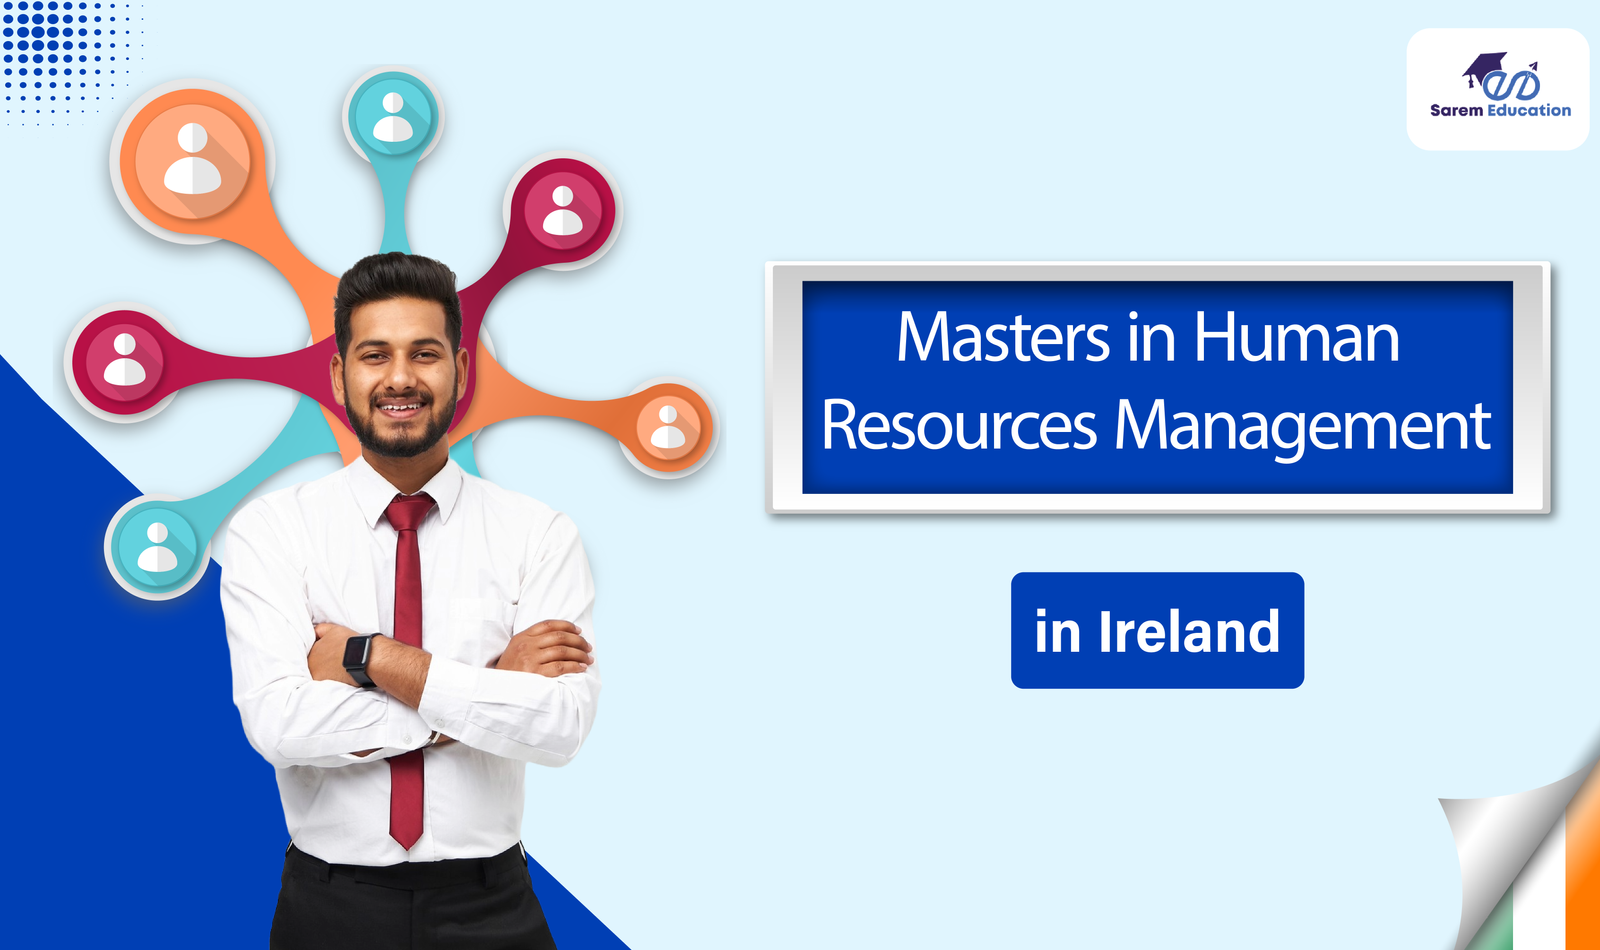 Why Pursue a Masters in Human Resource Management in Ireland?